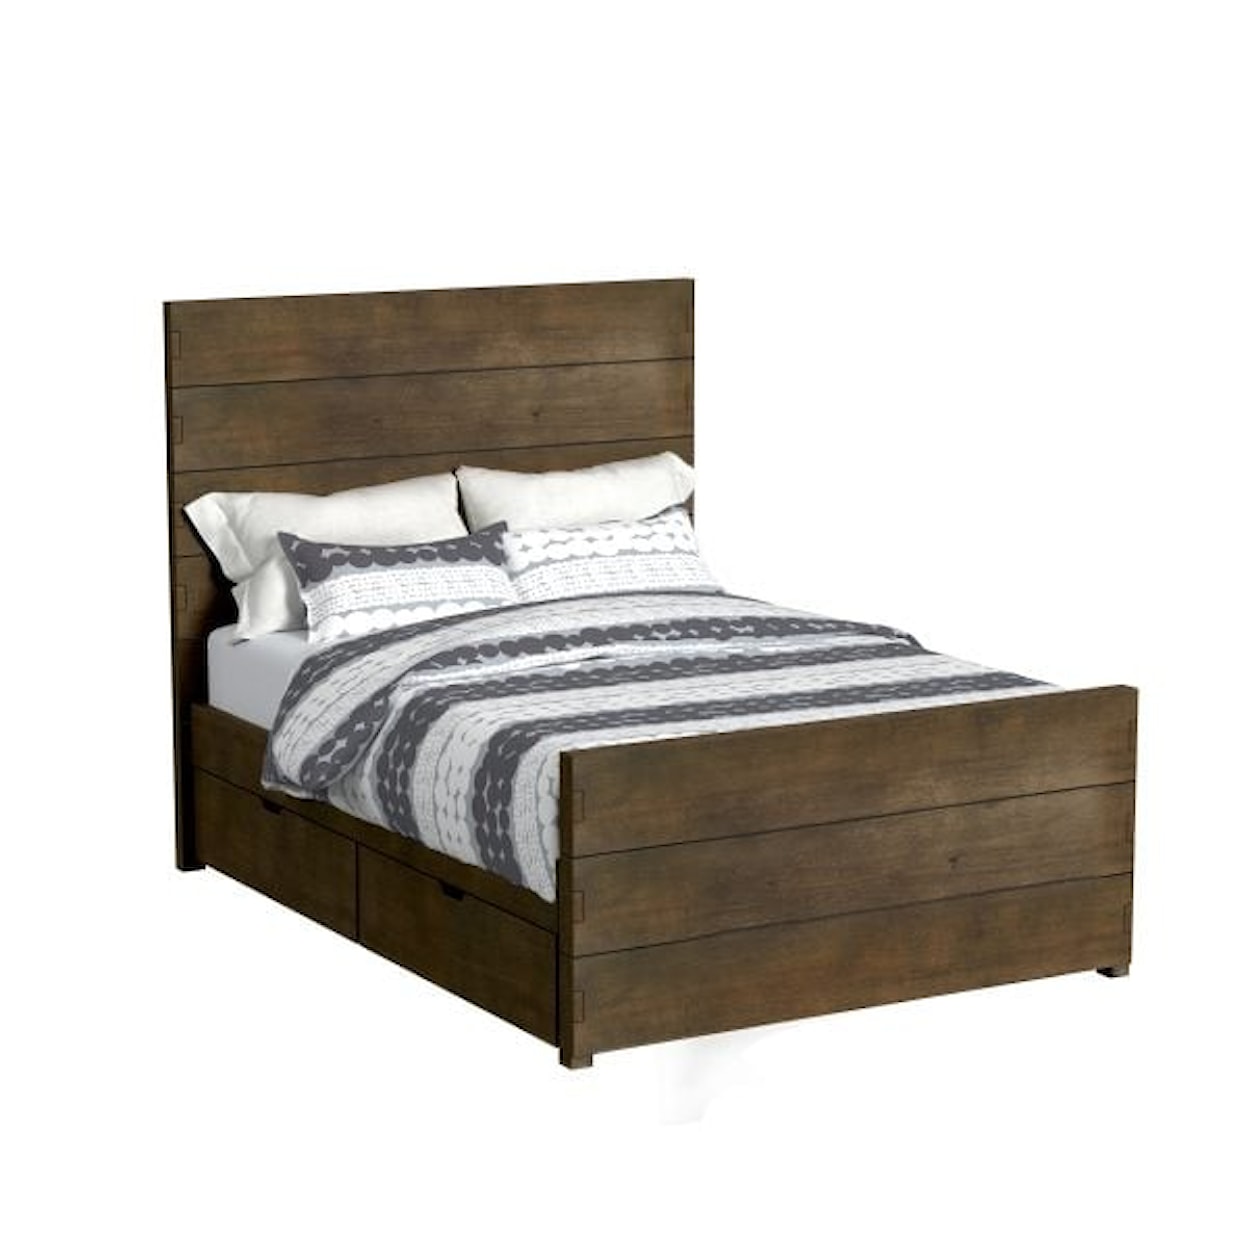 Westwood Design Dovetail Complete Full Bed